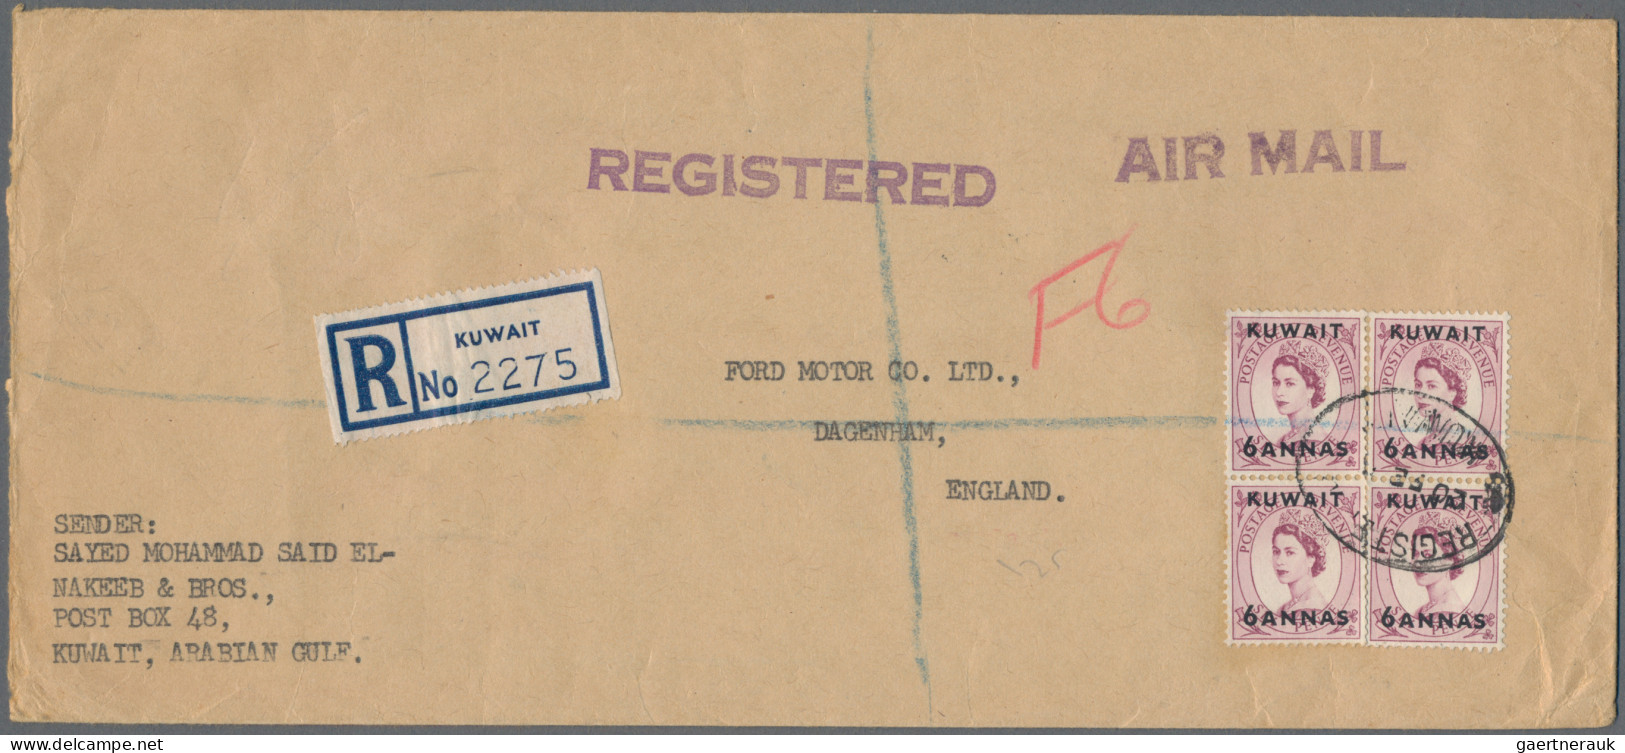 Kuwait: 1955 Registered Air Mail Envelope To England Bearing 1954 6a On 6d Two P - Kuwait